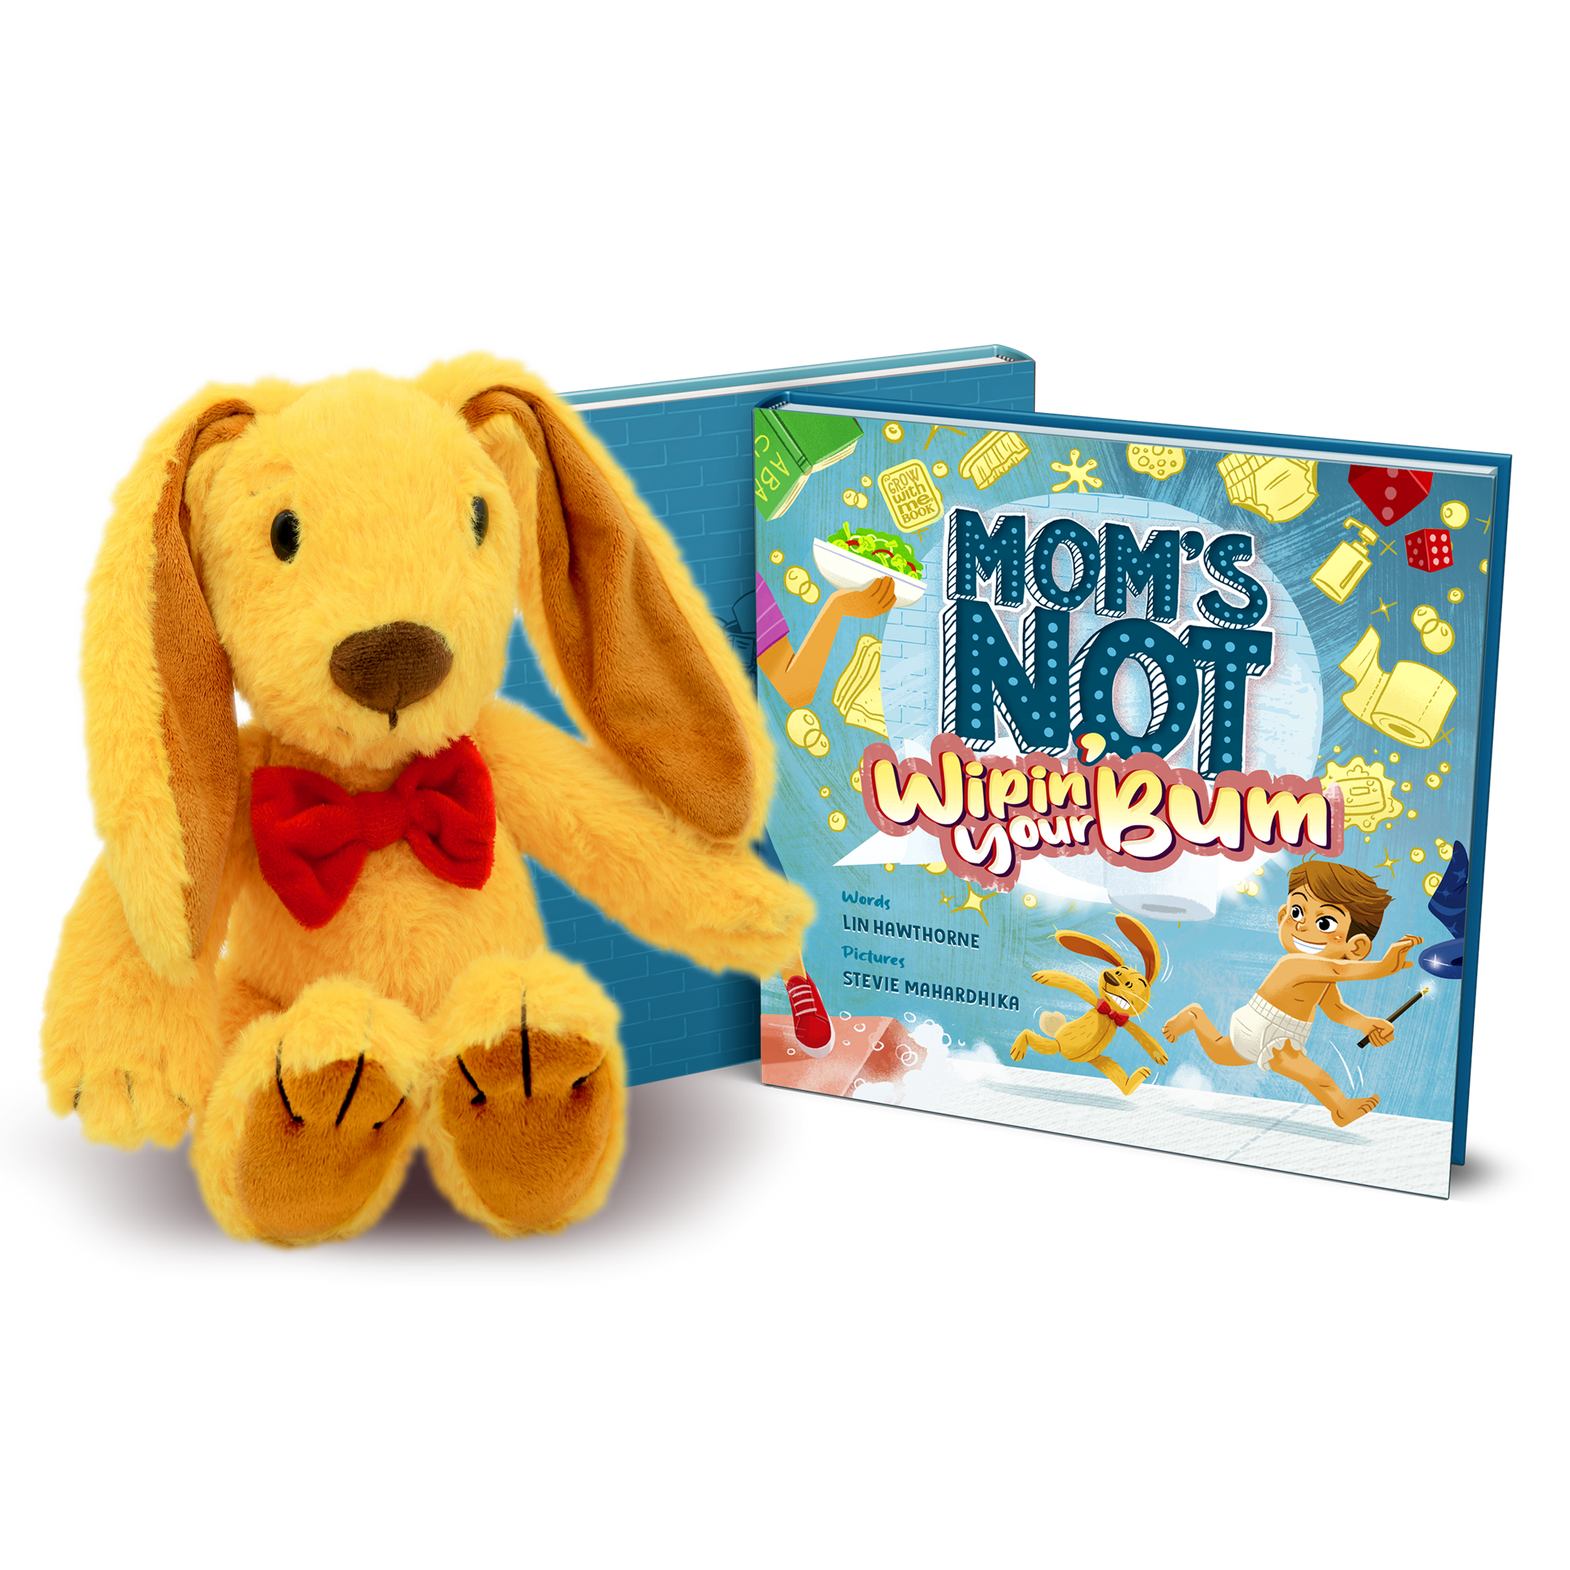 Mom's Not Wipin' Your Bum Hardback Book with Abacus Plush Rabbit BUNDLE (2 Items)